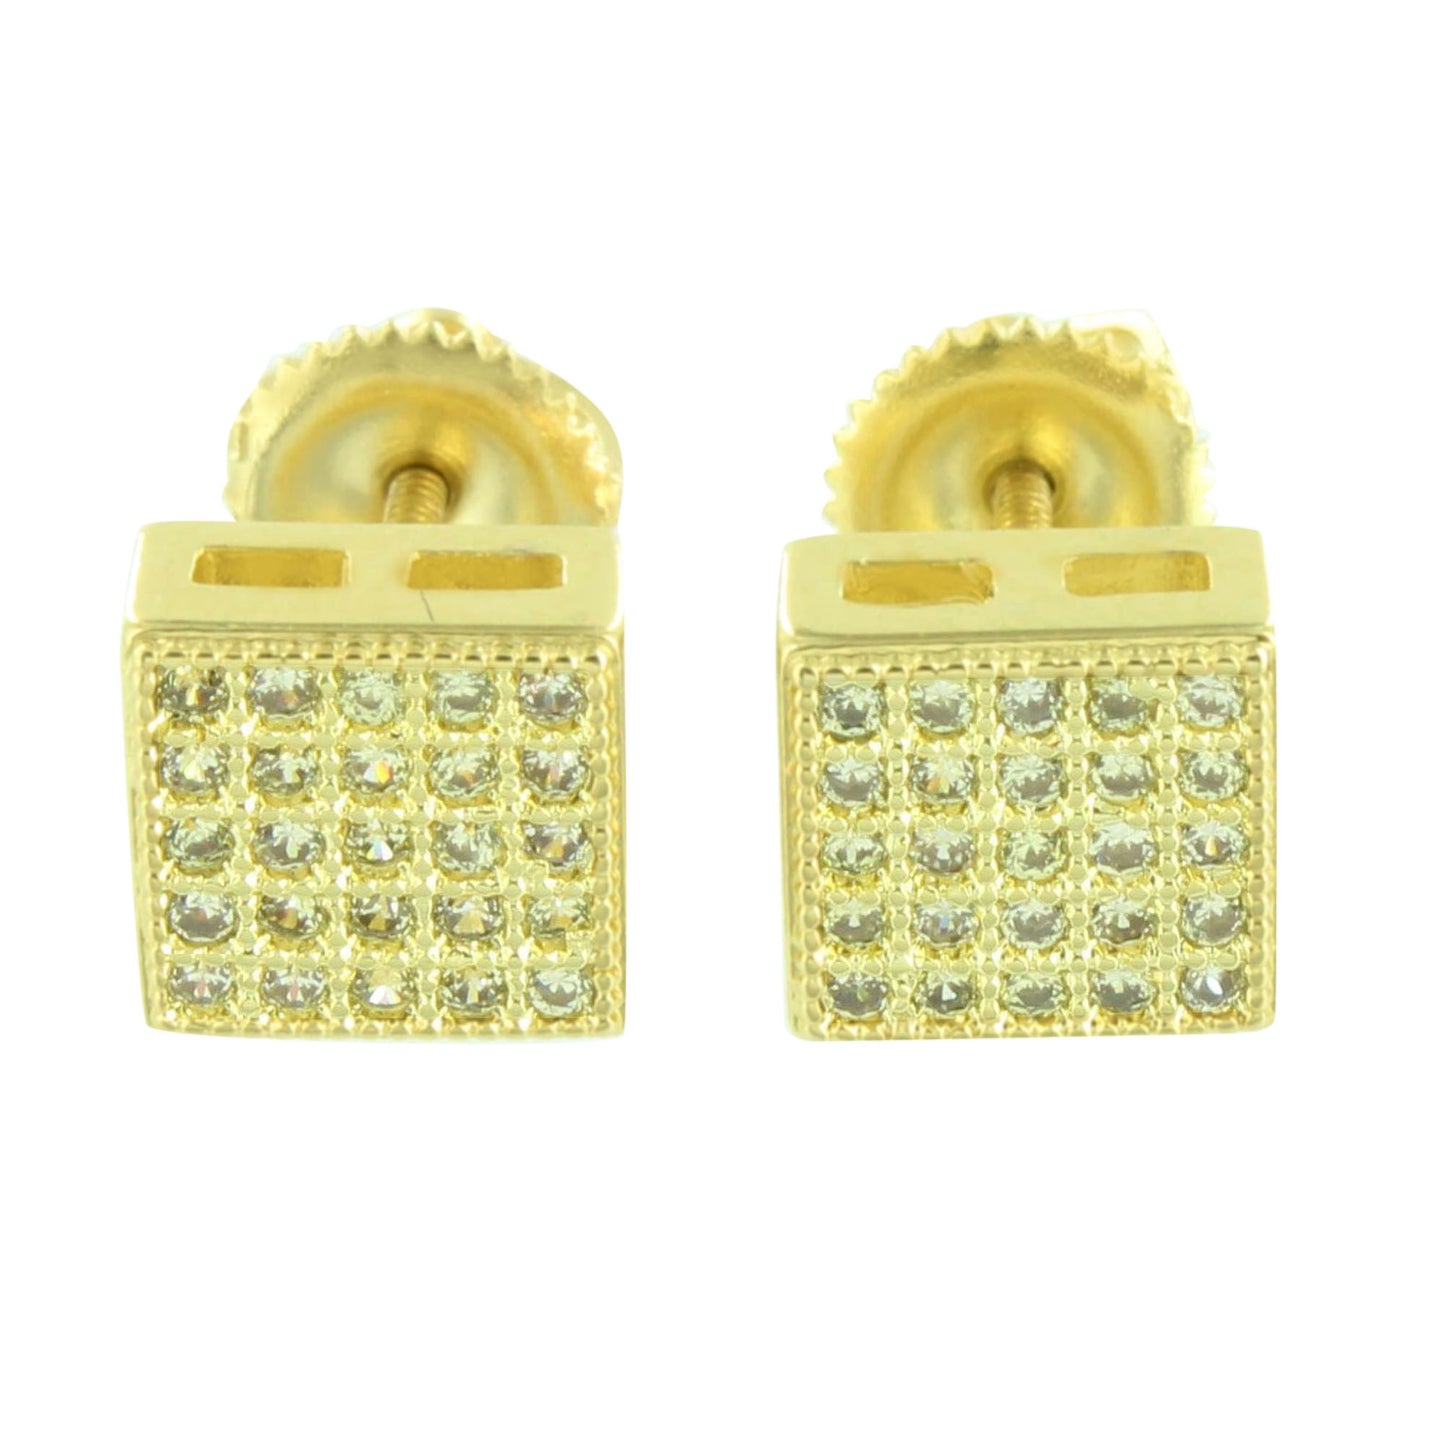 Earrings Square Face Screw Back Micro Pave Gold Finish